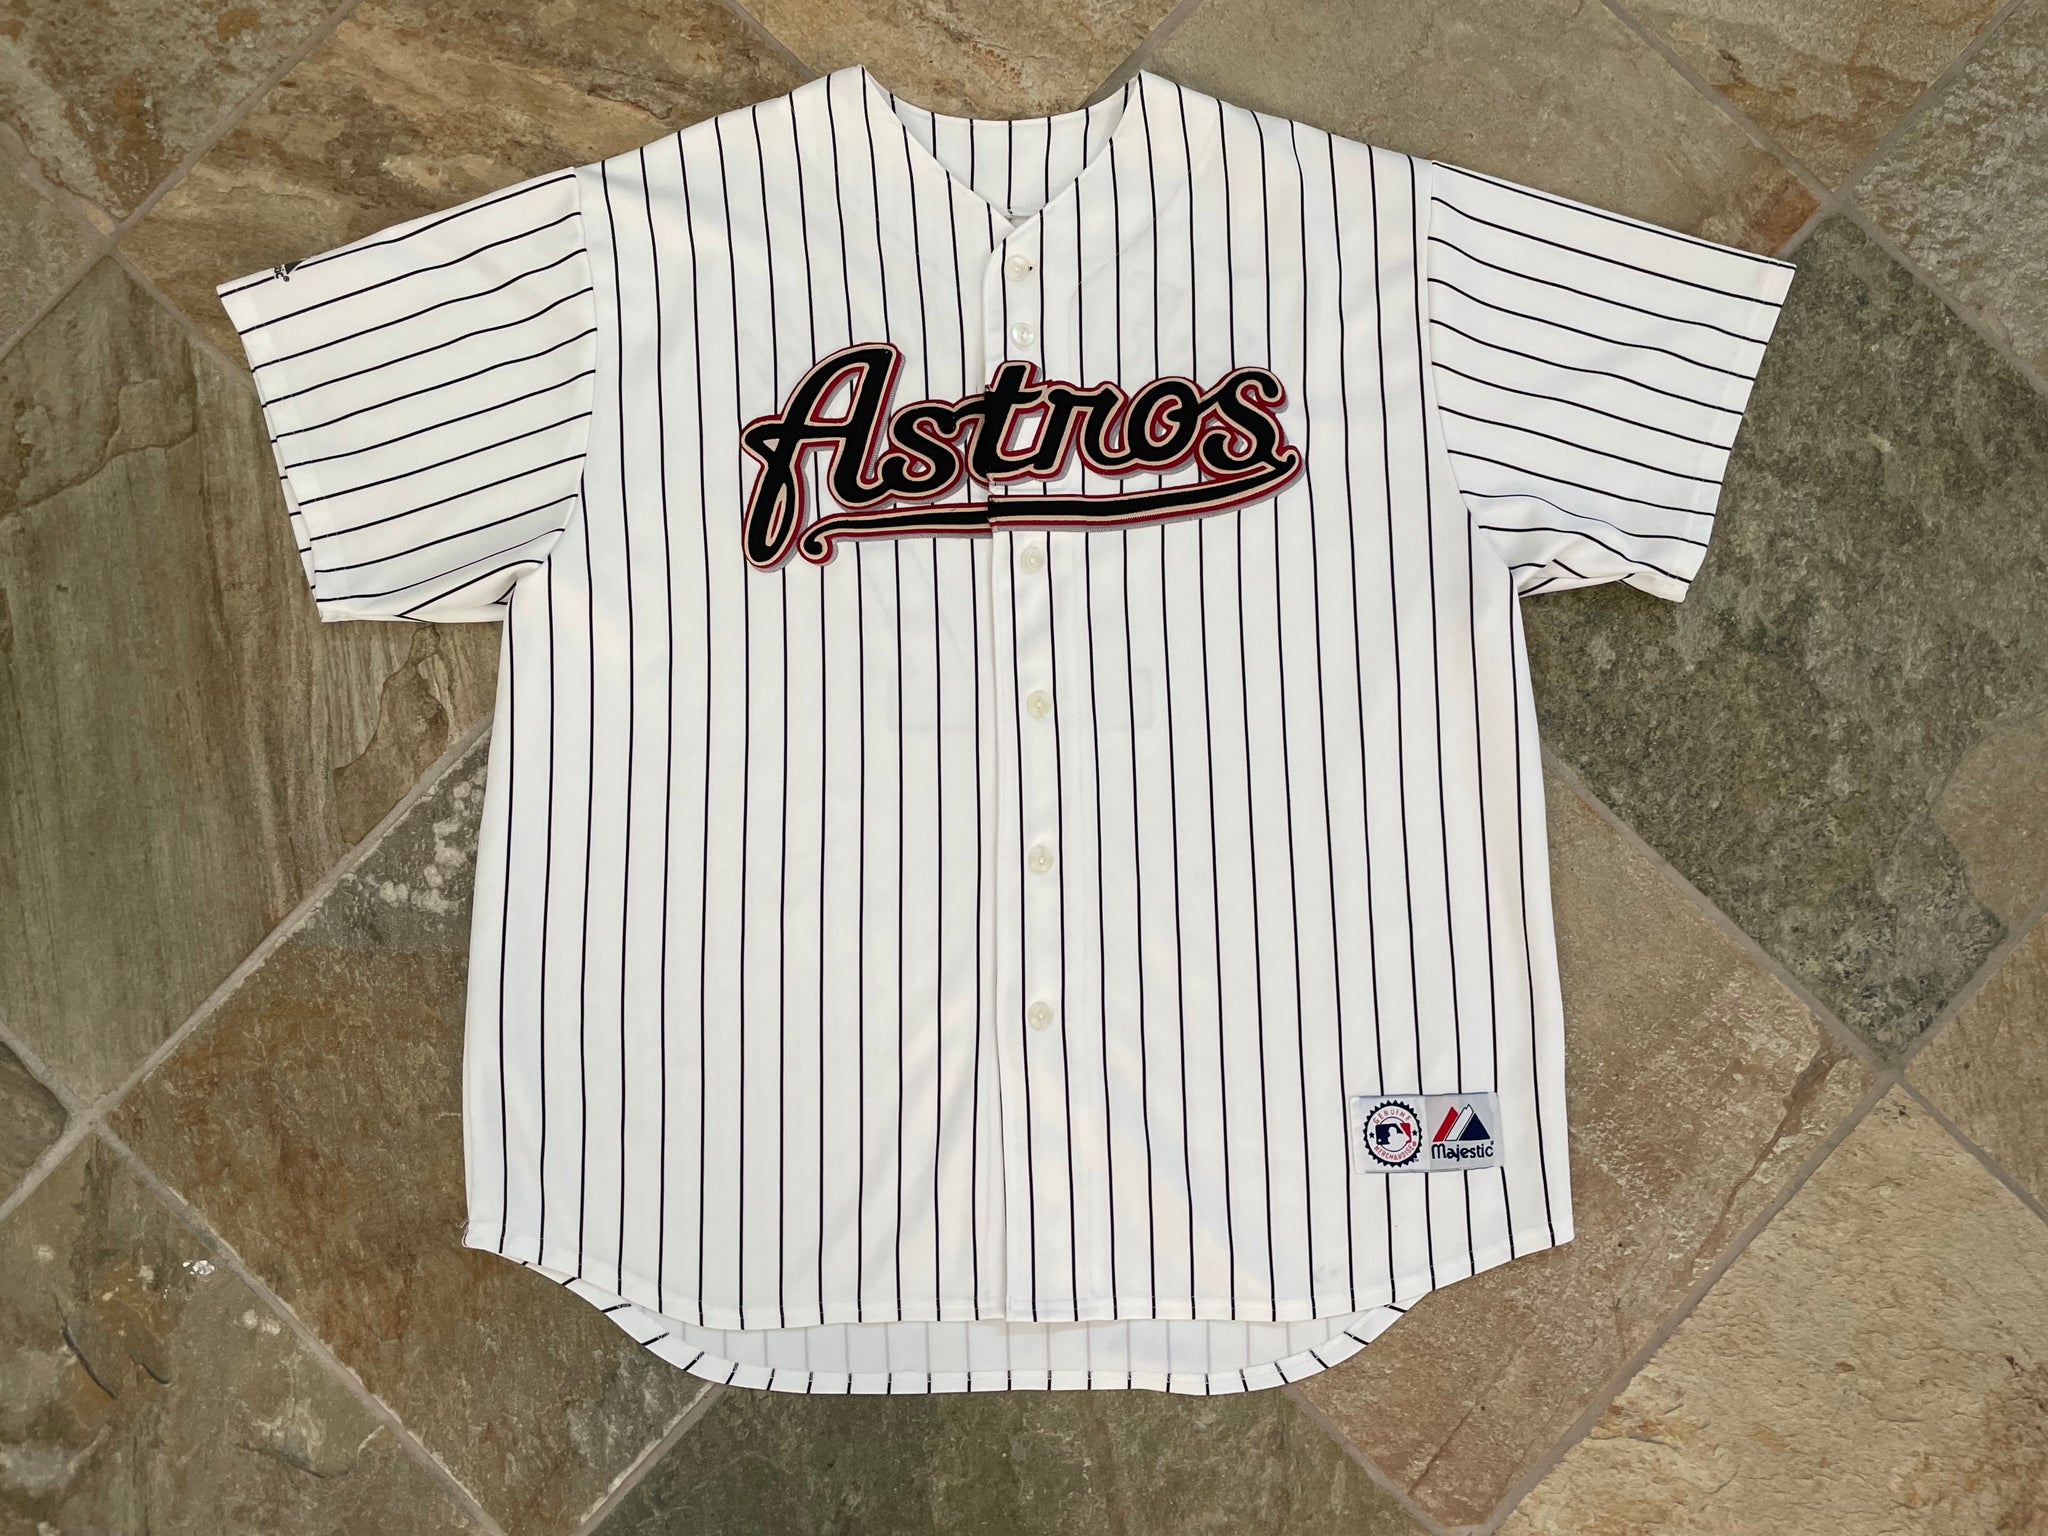 HOUSTON ASTROS 1990's Majestic Throwback Home Baseball Jersey